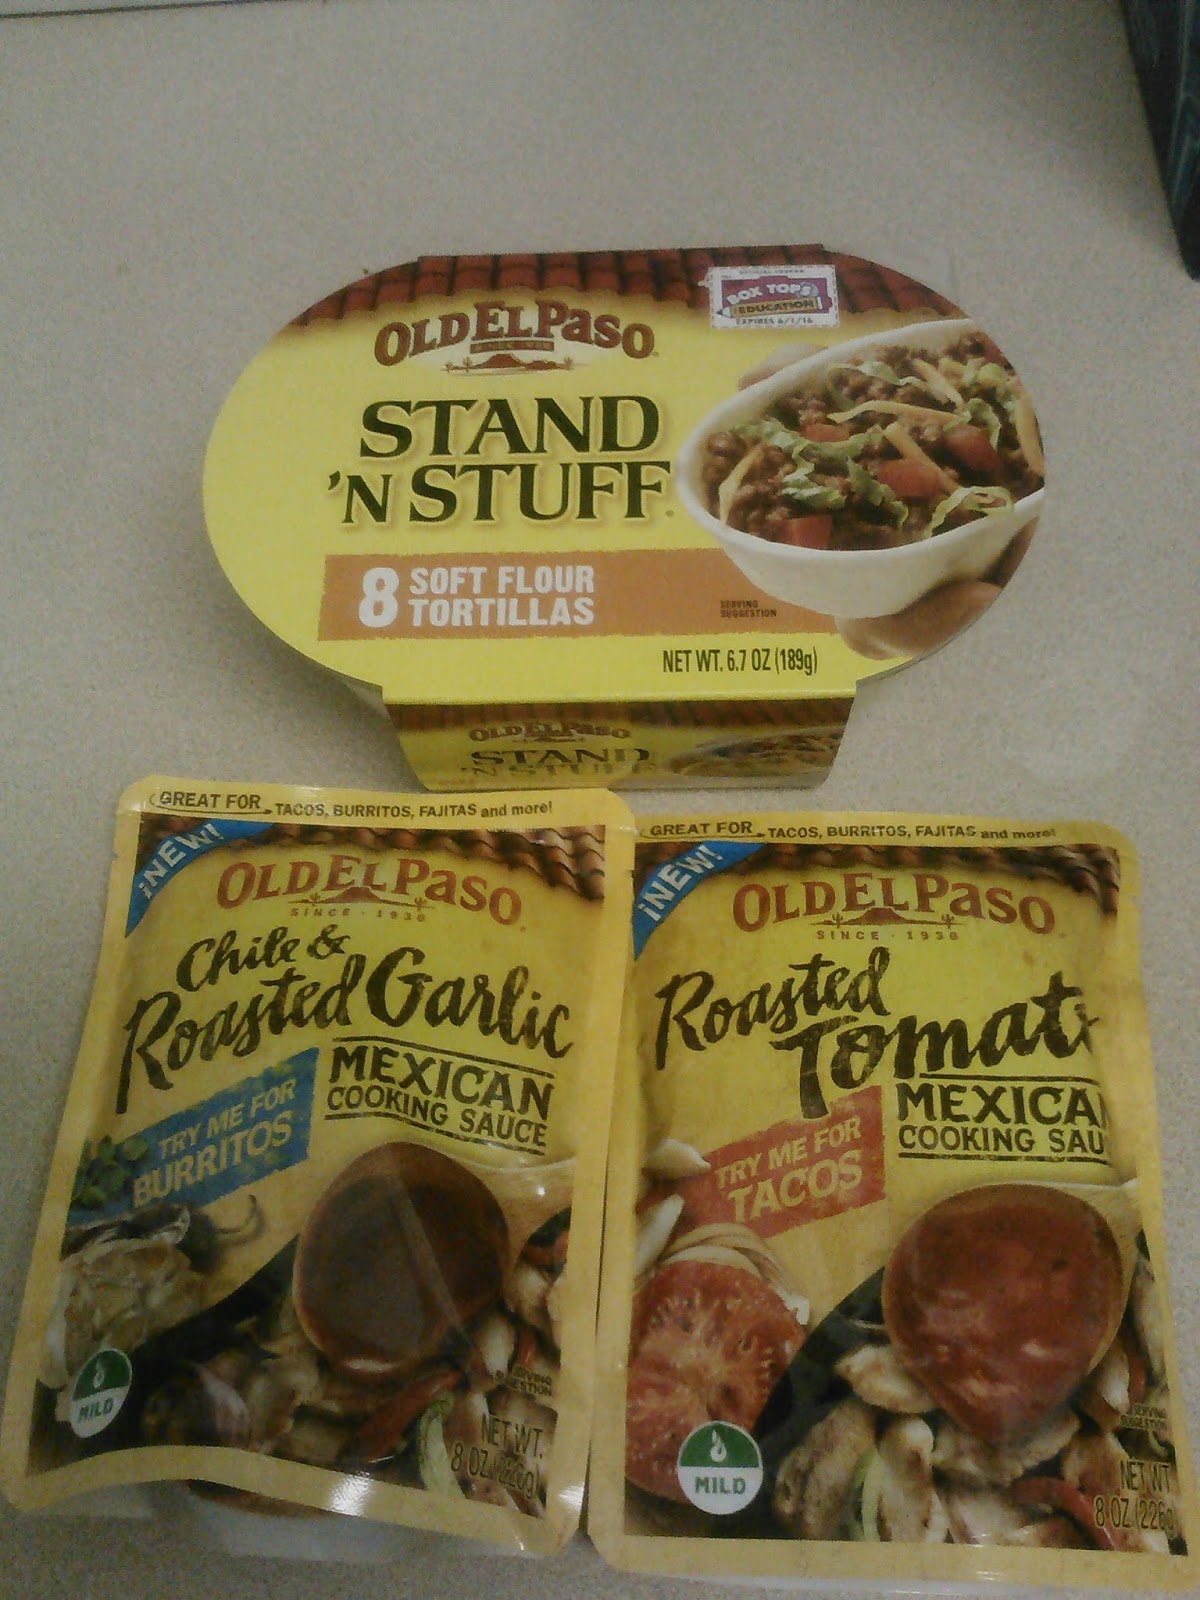 Old El Paso Stand N Stuff Soft Flour Tortillas And Mexican Cooking Sauces Review,Cooking Chestnuts On Bbq